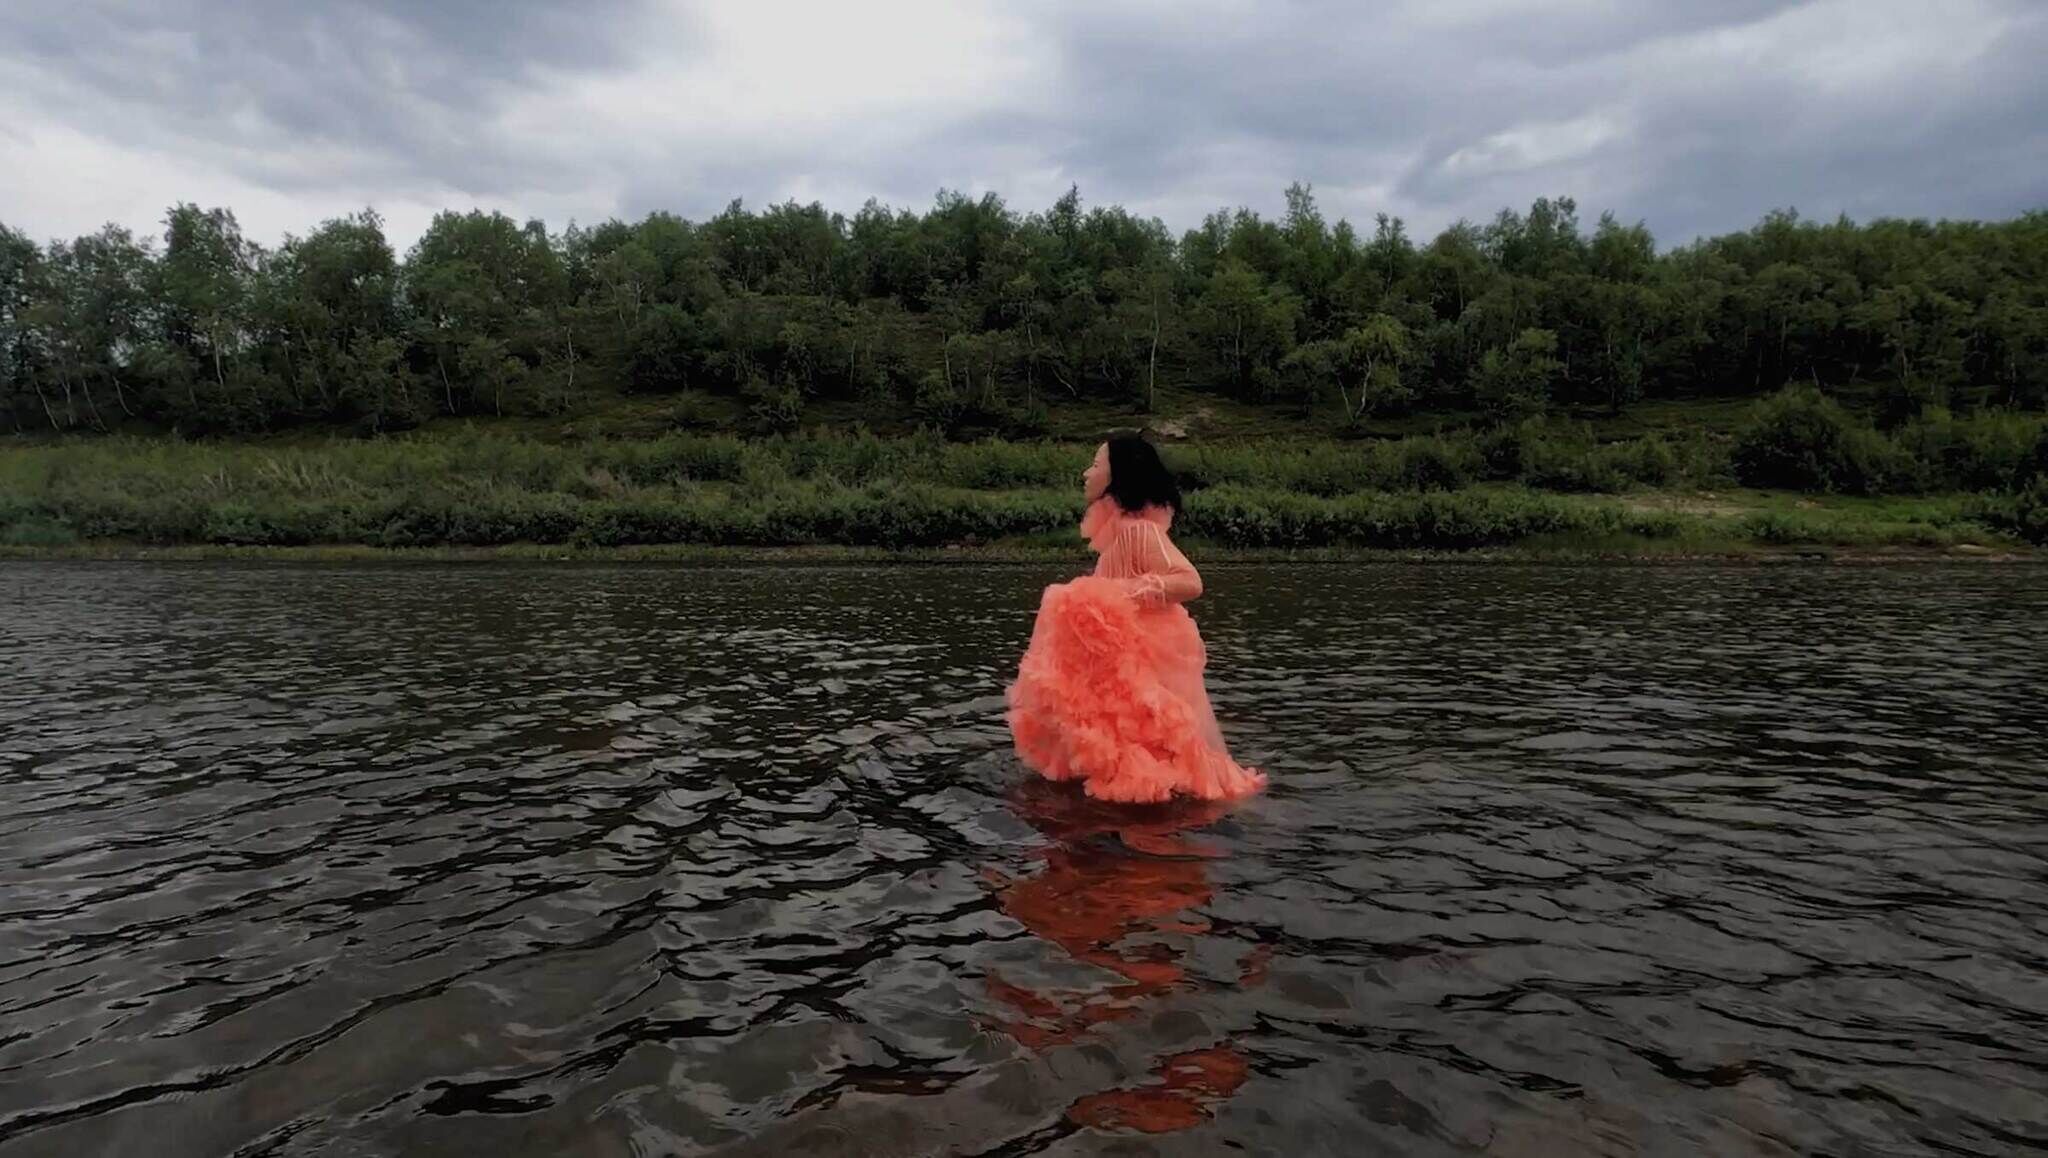 Person in a voluminous orange dress standing in a river with a backdrop of greenery and overcast sky.